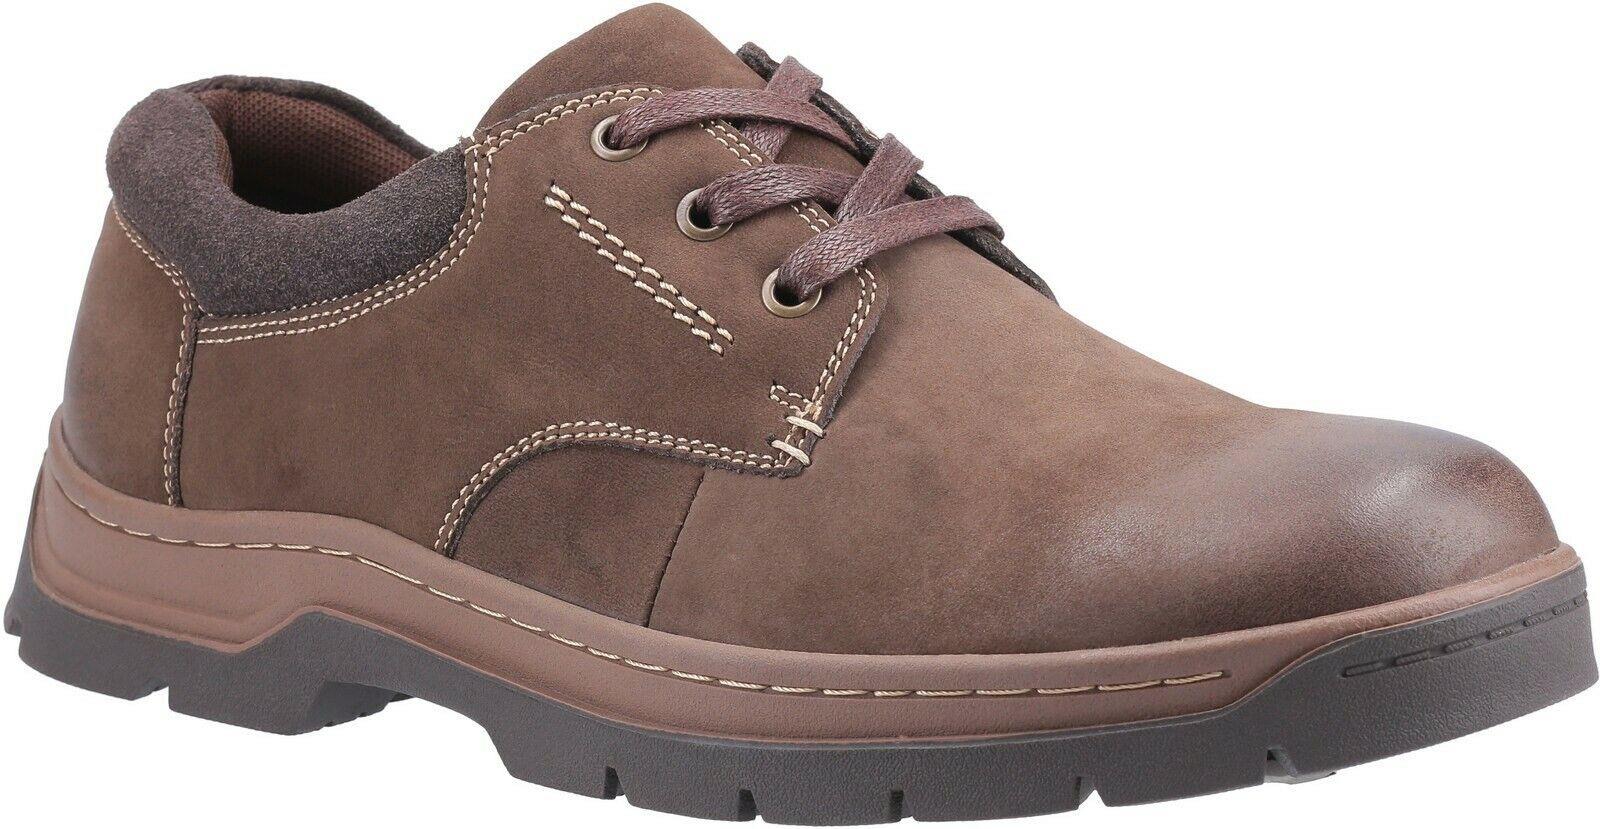 Cotswold Thickwood brown nubuck burnished leather men's lace-up casual shoe